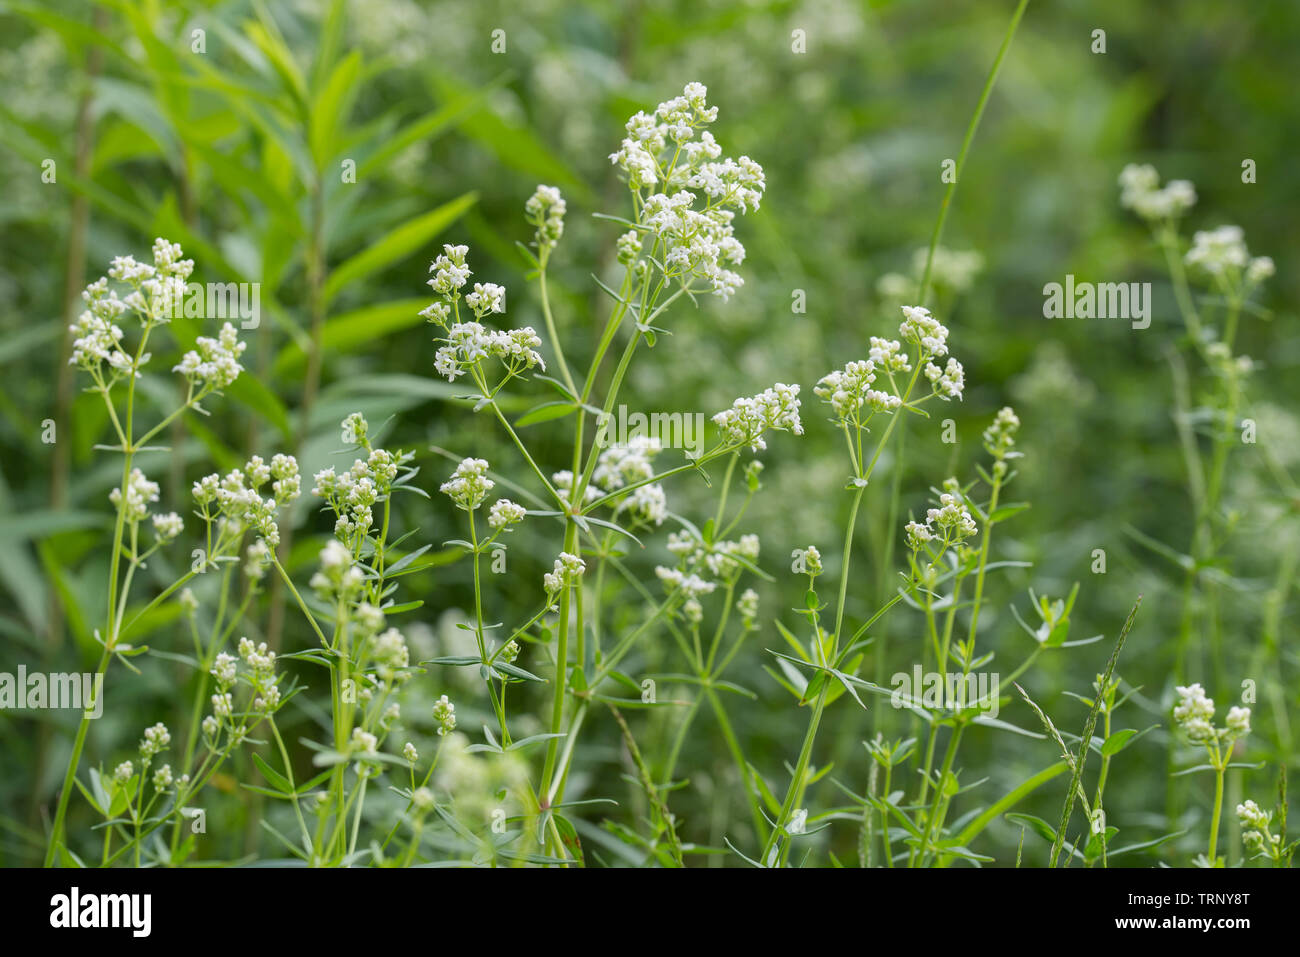 Galium white flowers in forest Stock Photo